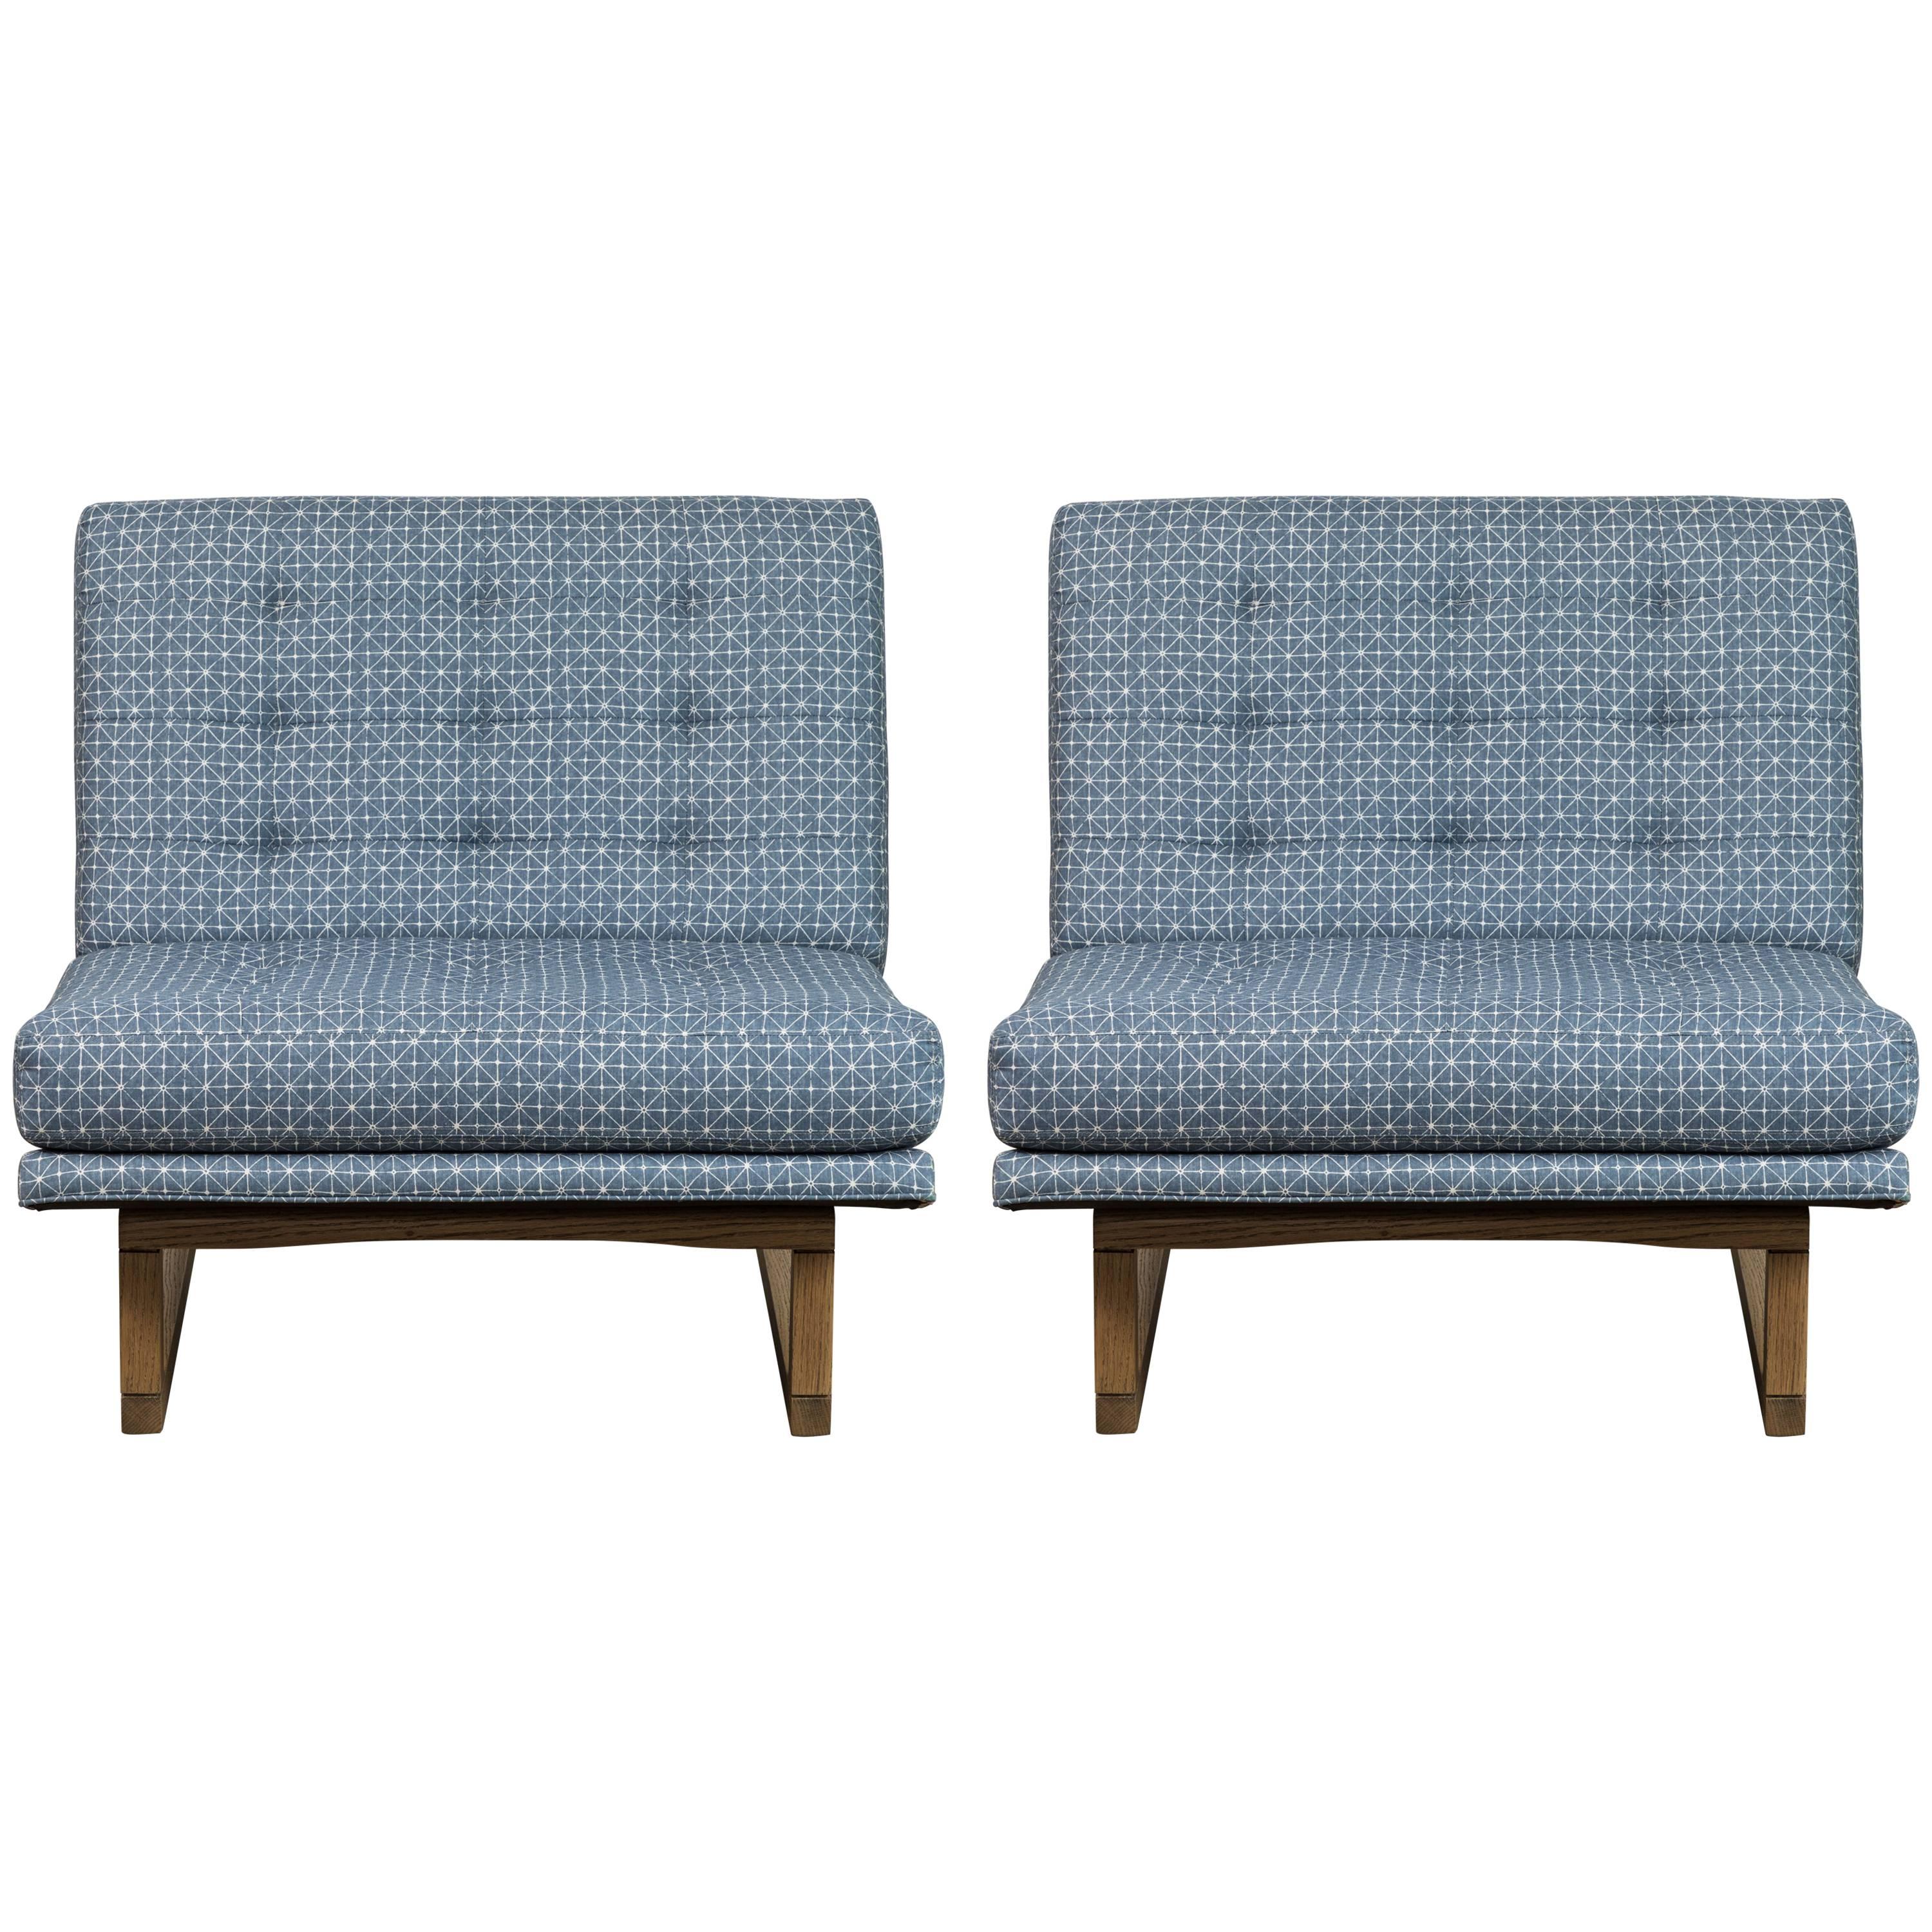 Pair of Griffin Chairs by Lawson-Fenning